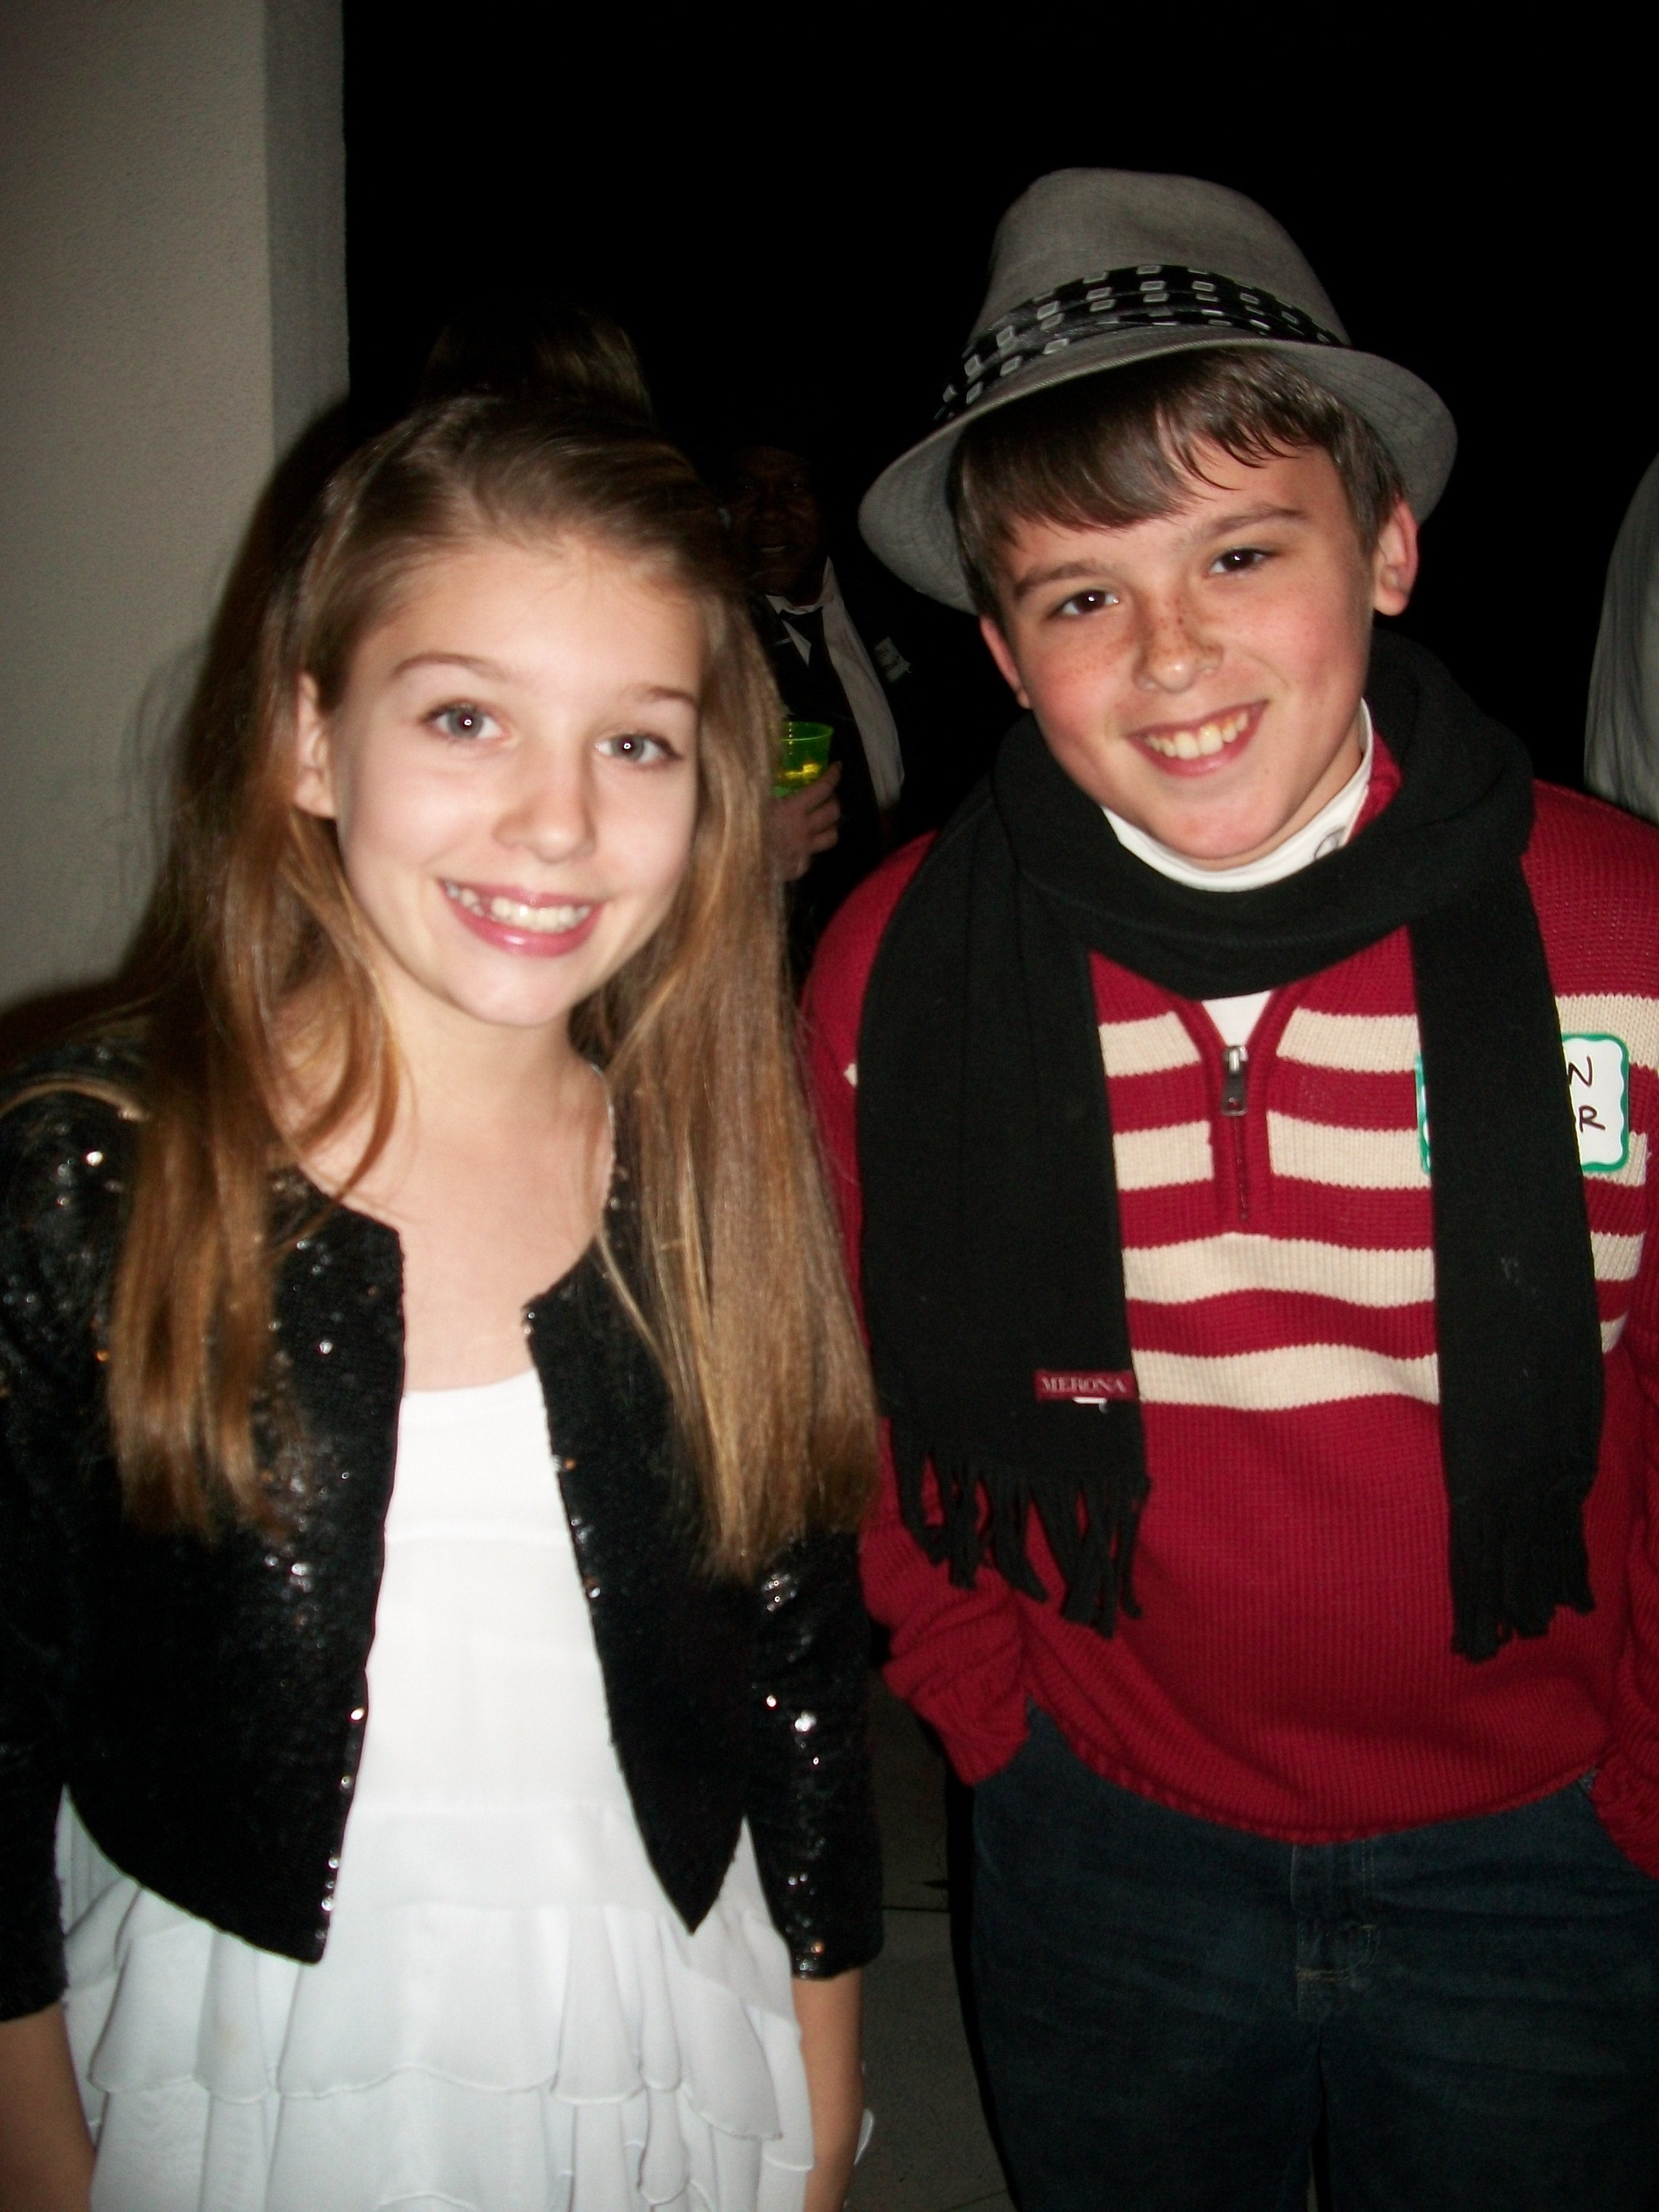 Austin and Paris Smith hanging out at a Hollywood party in March 2011